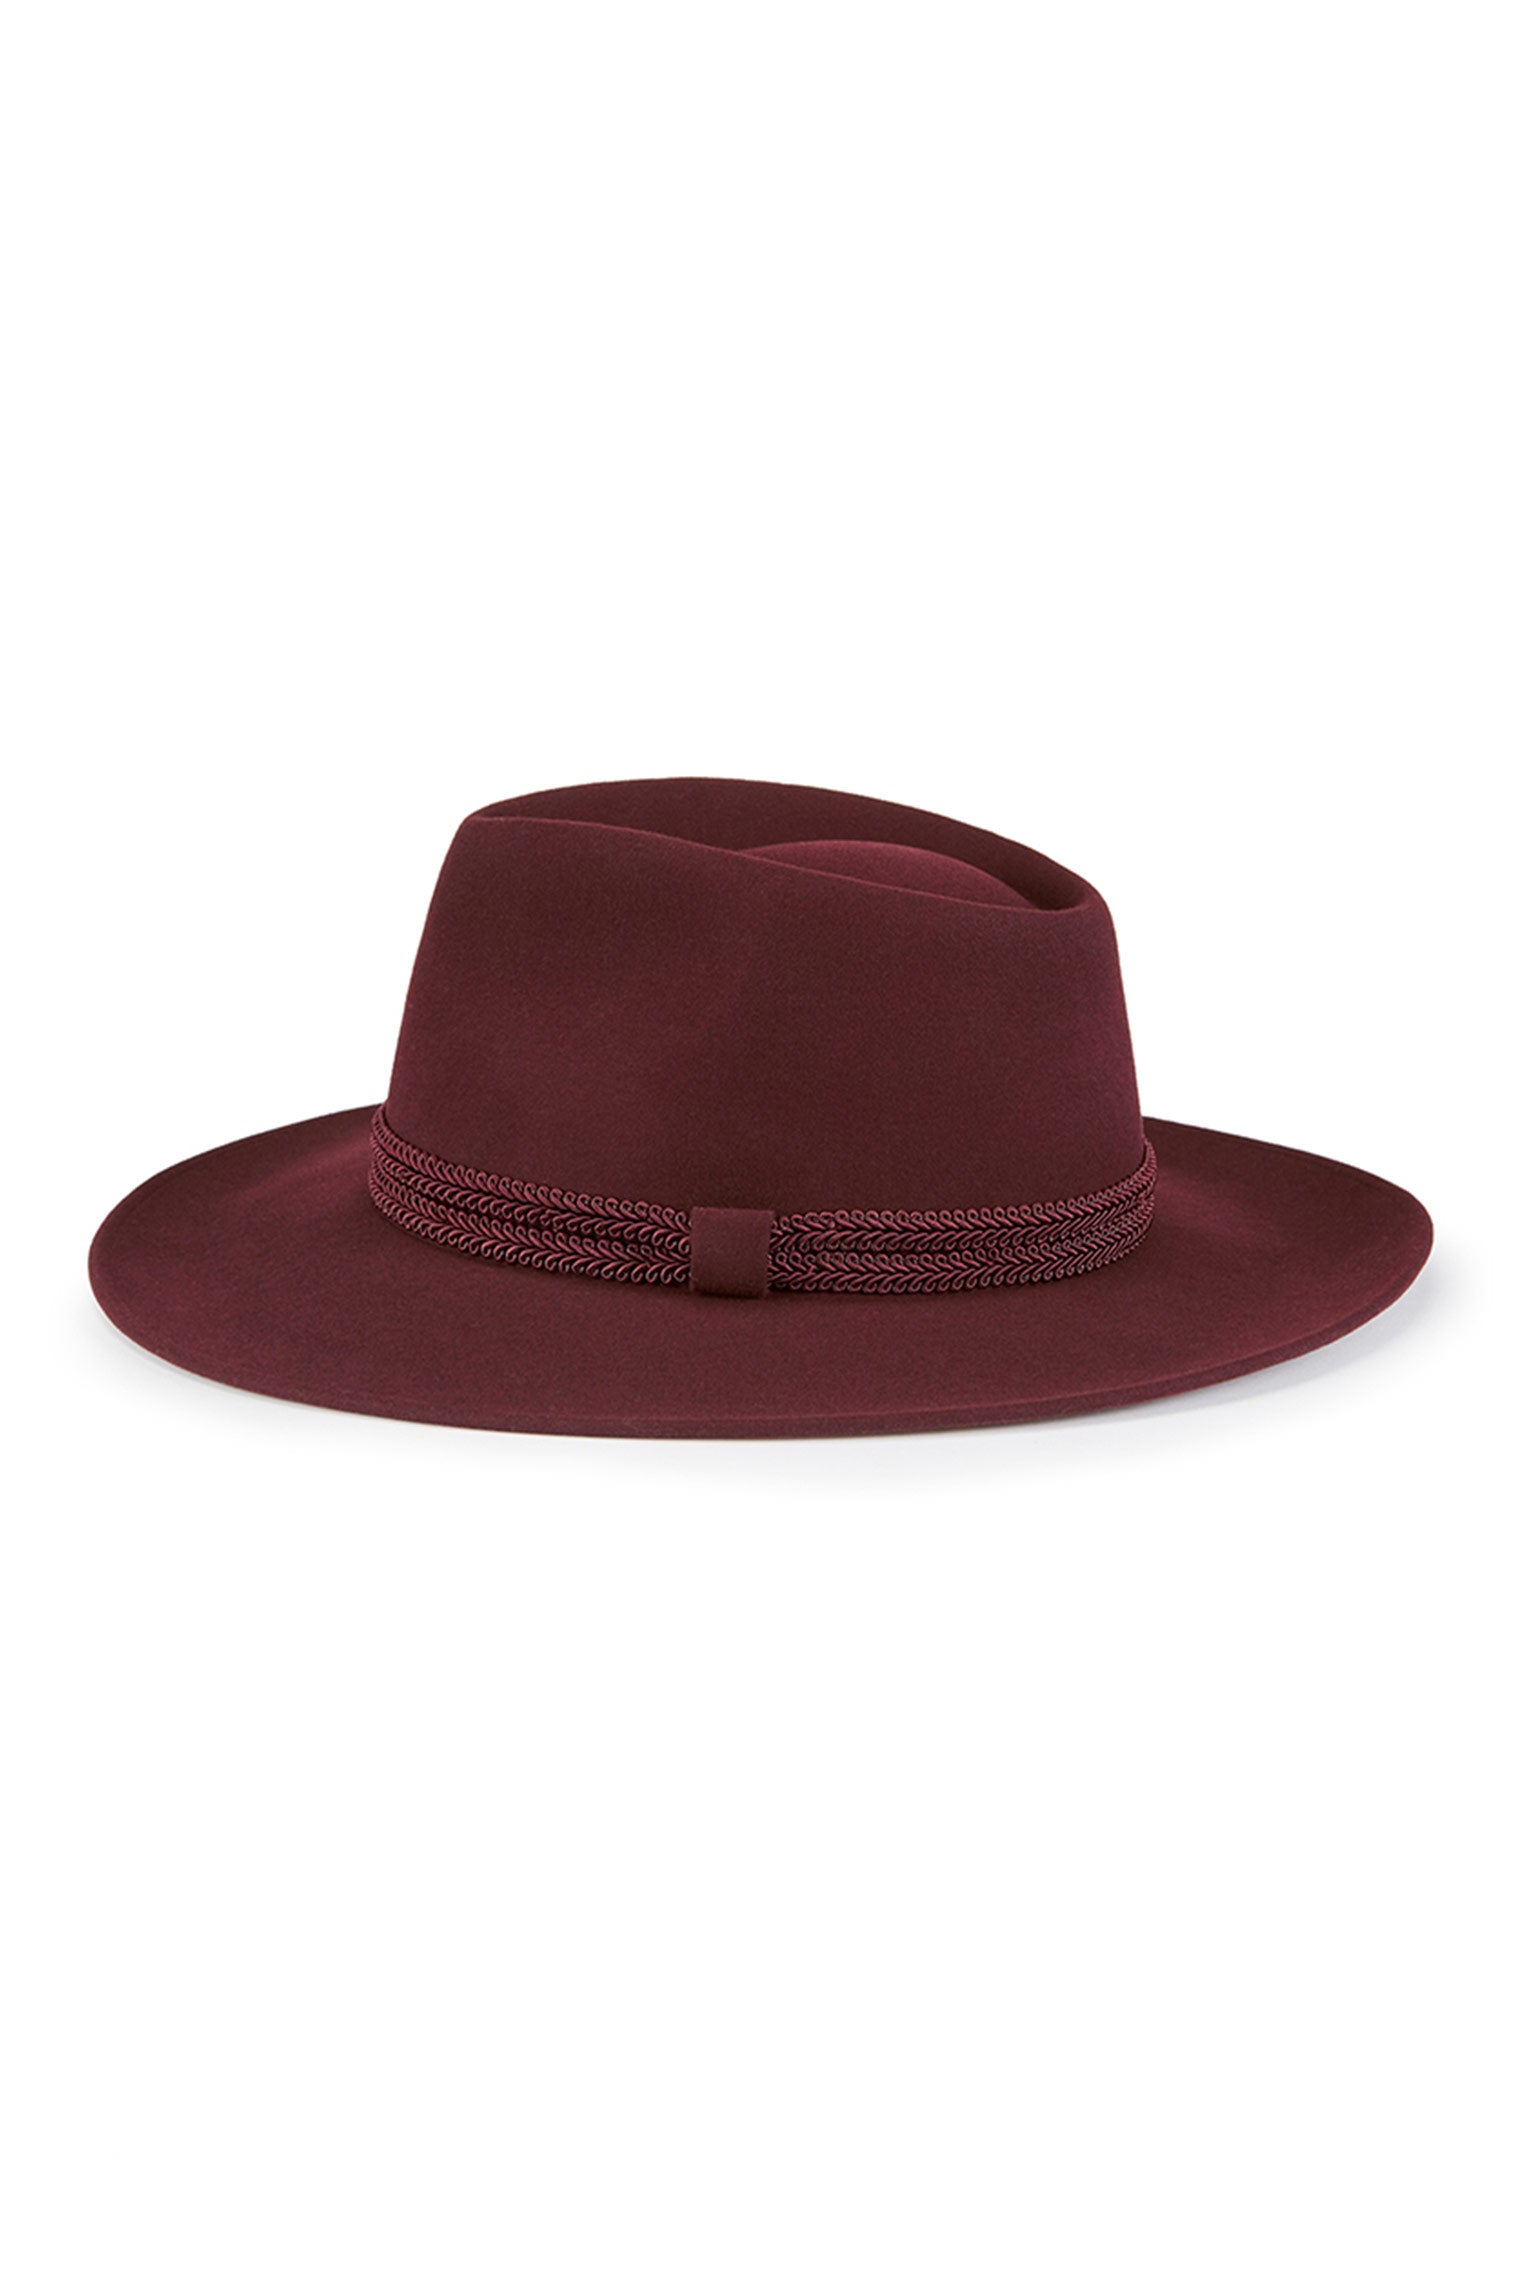 Escorial Wool Meredith Fedora - Products - Lock & Co. Hatters London UK